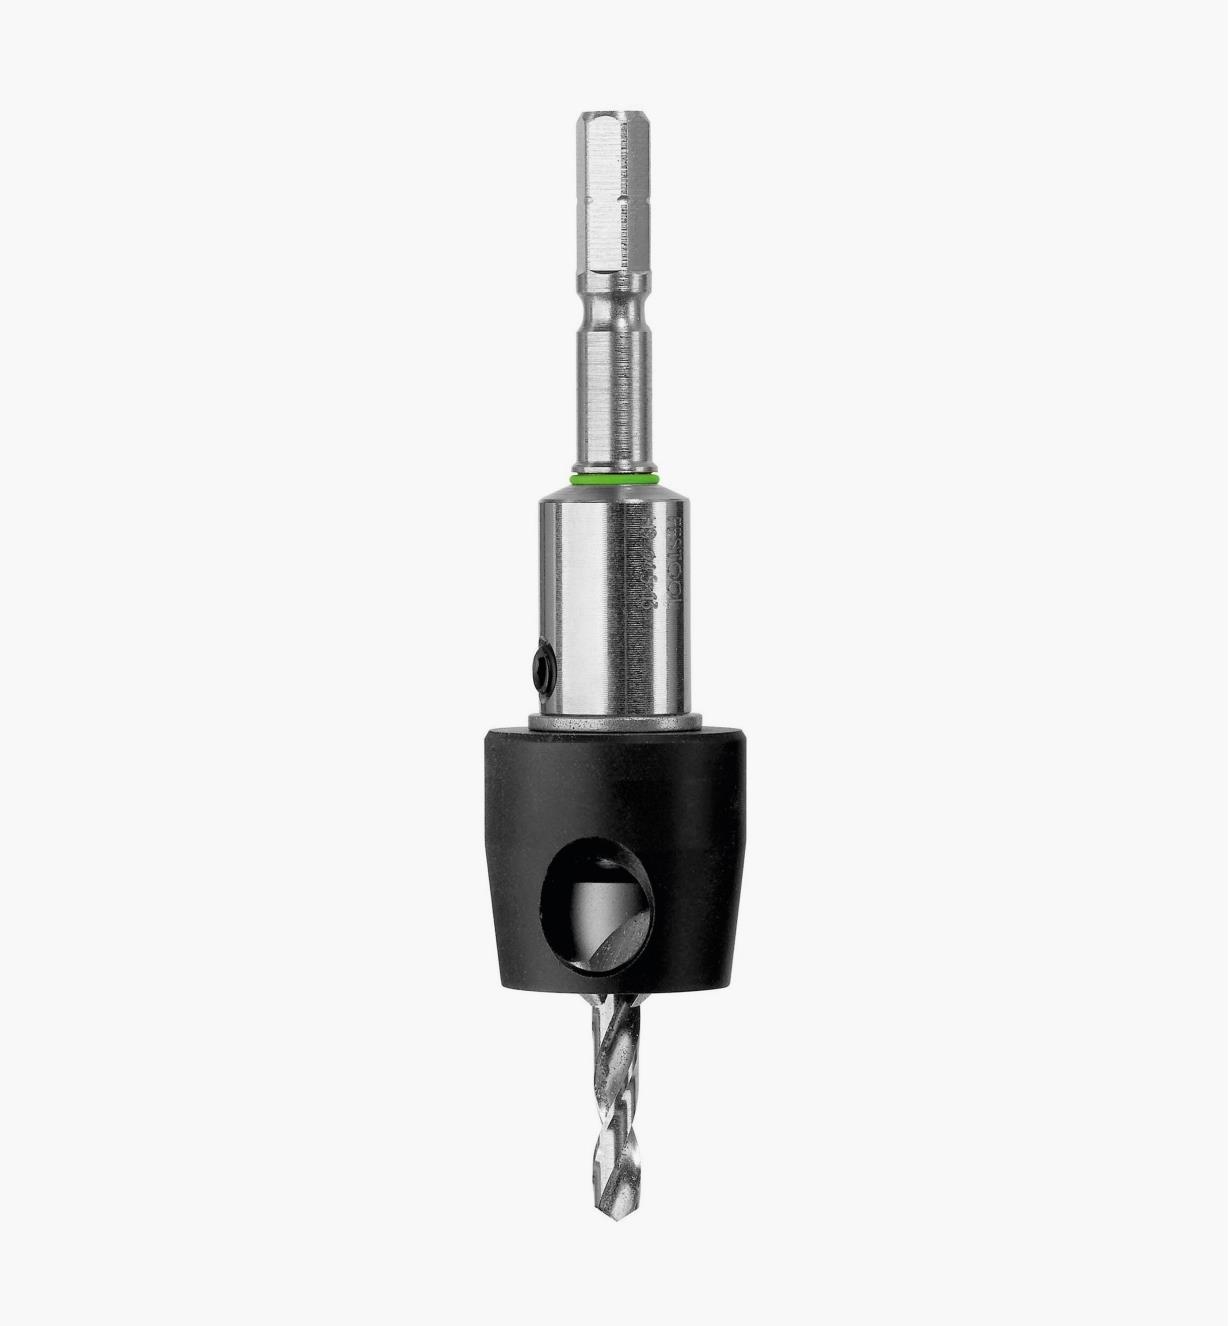 ZA492523 - Centrotec Drill Bit With Depth Stop - 3.5mm